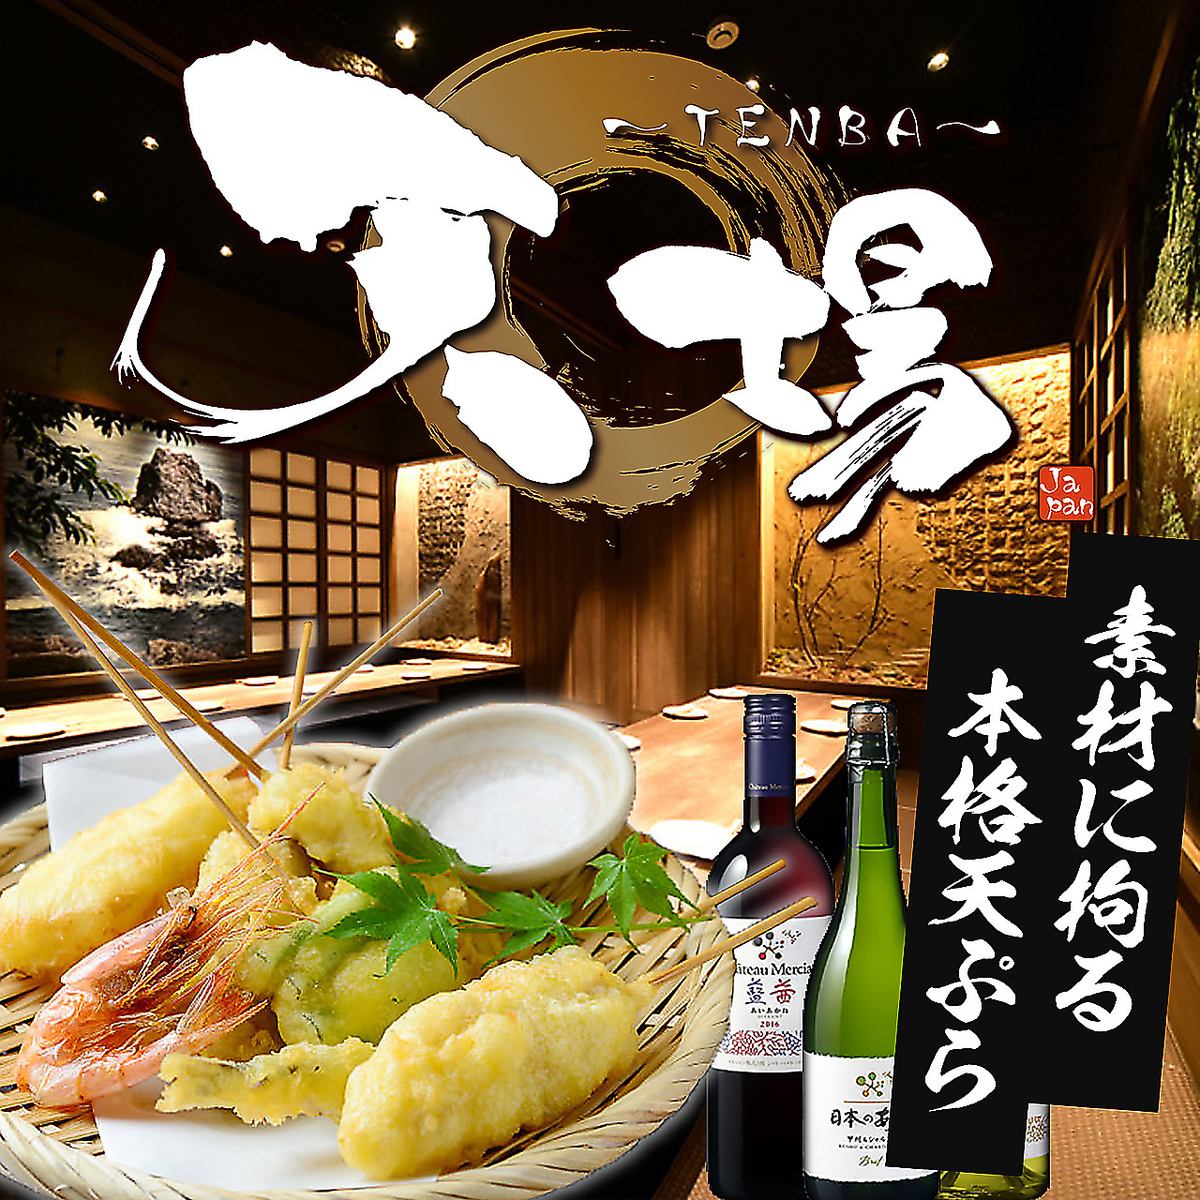 Enjoy a leisurely meal in a private room♪We offer a variety of courses★